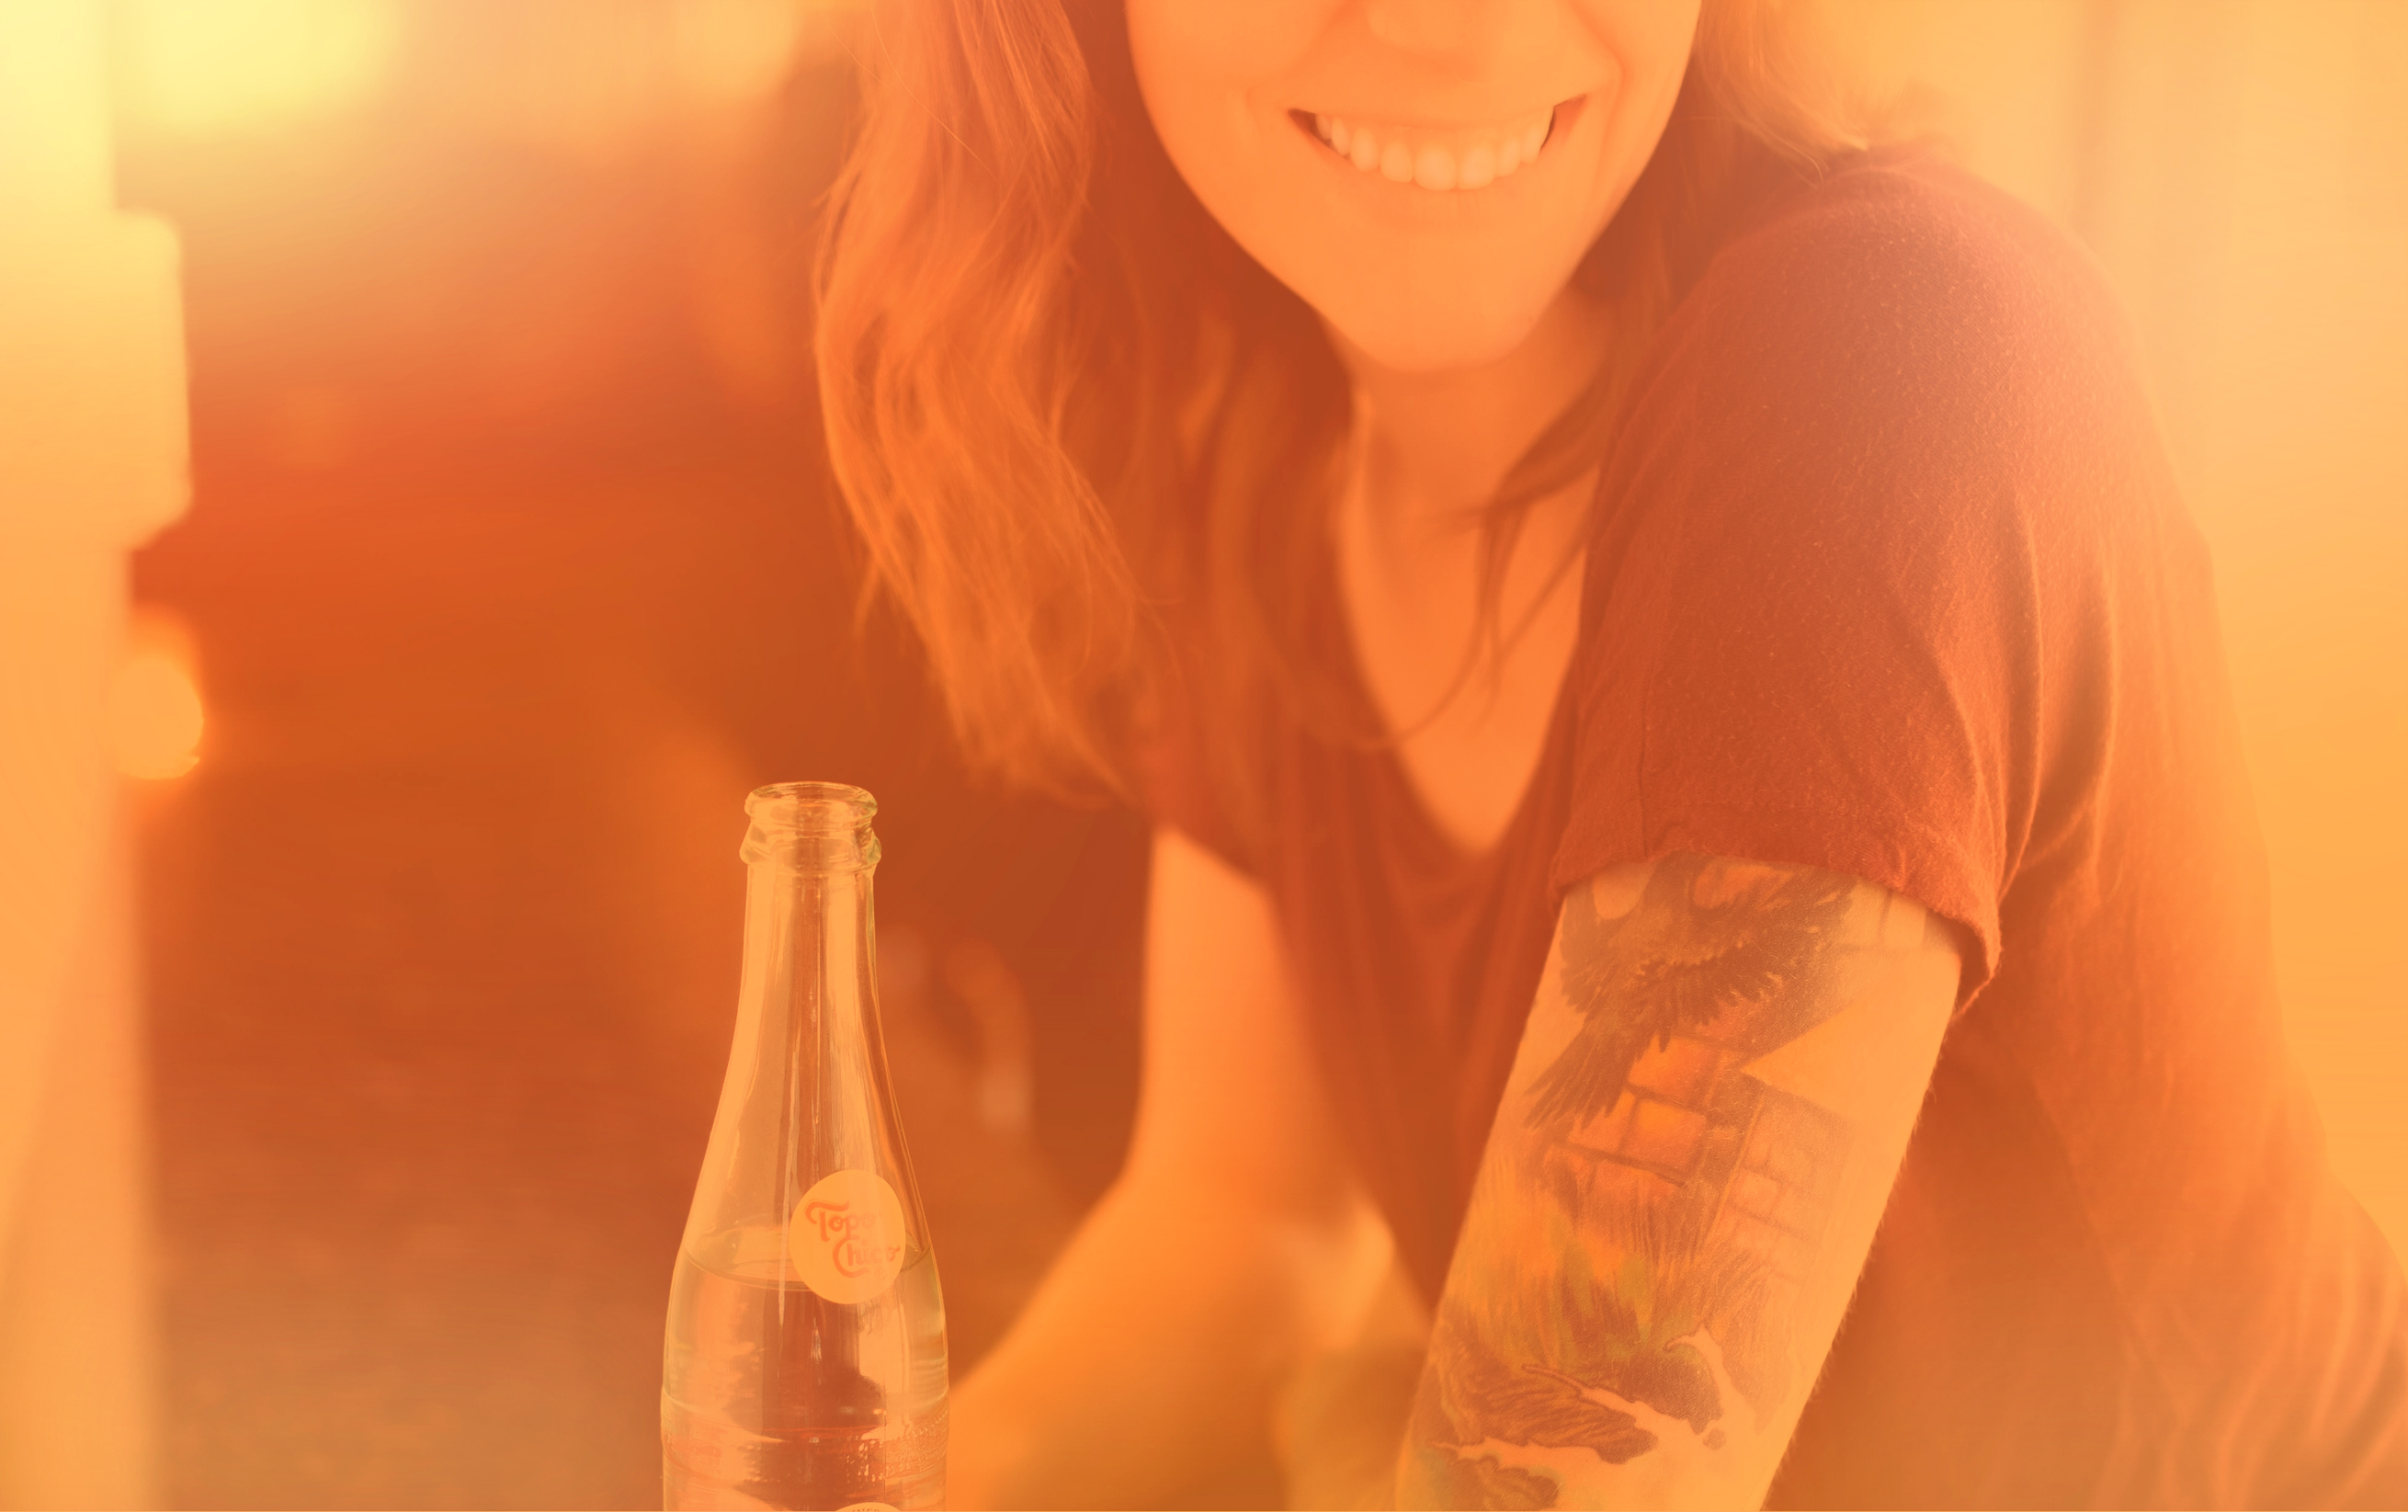 Woman with drink smiling - colorized hazy effect photo